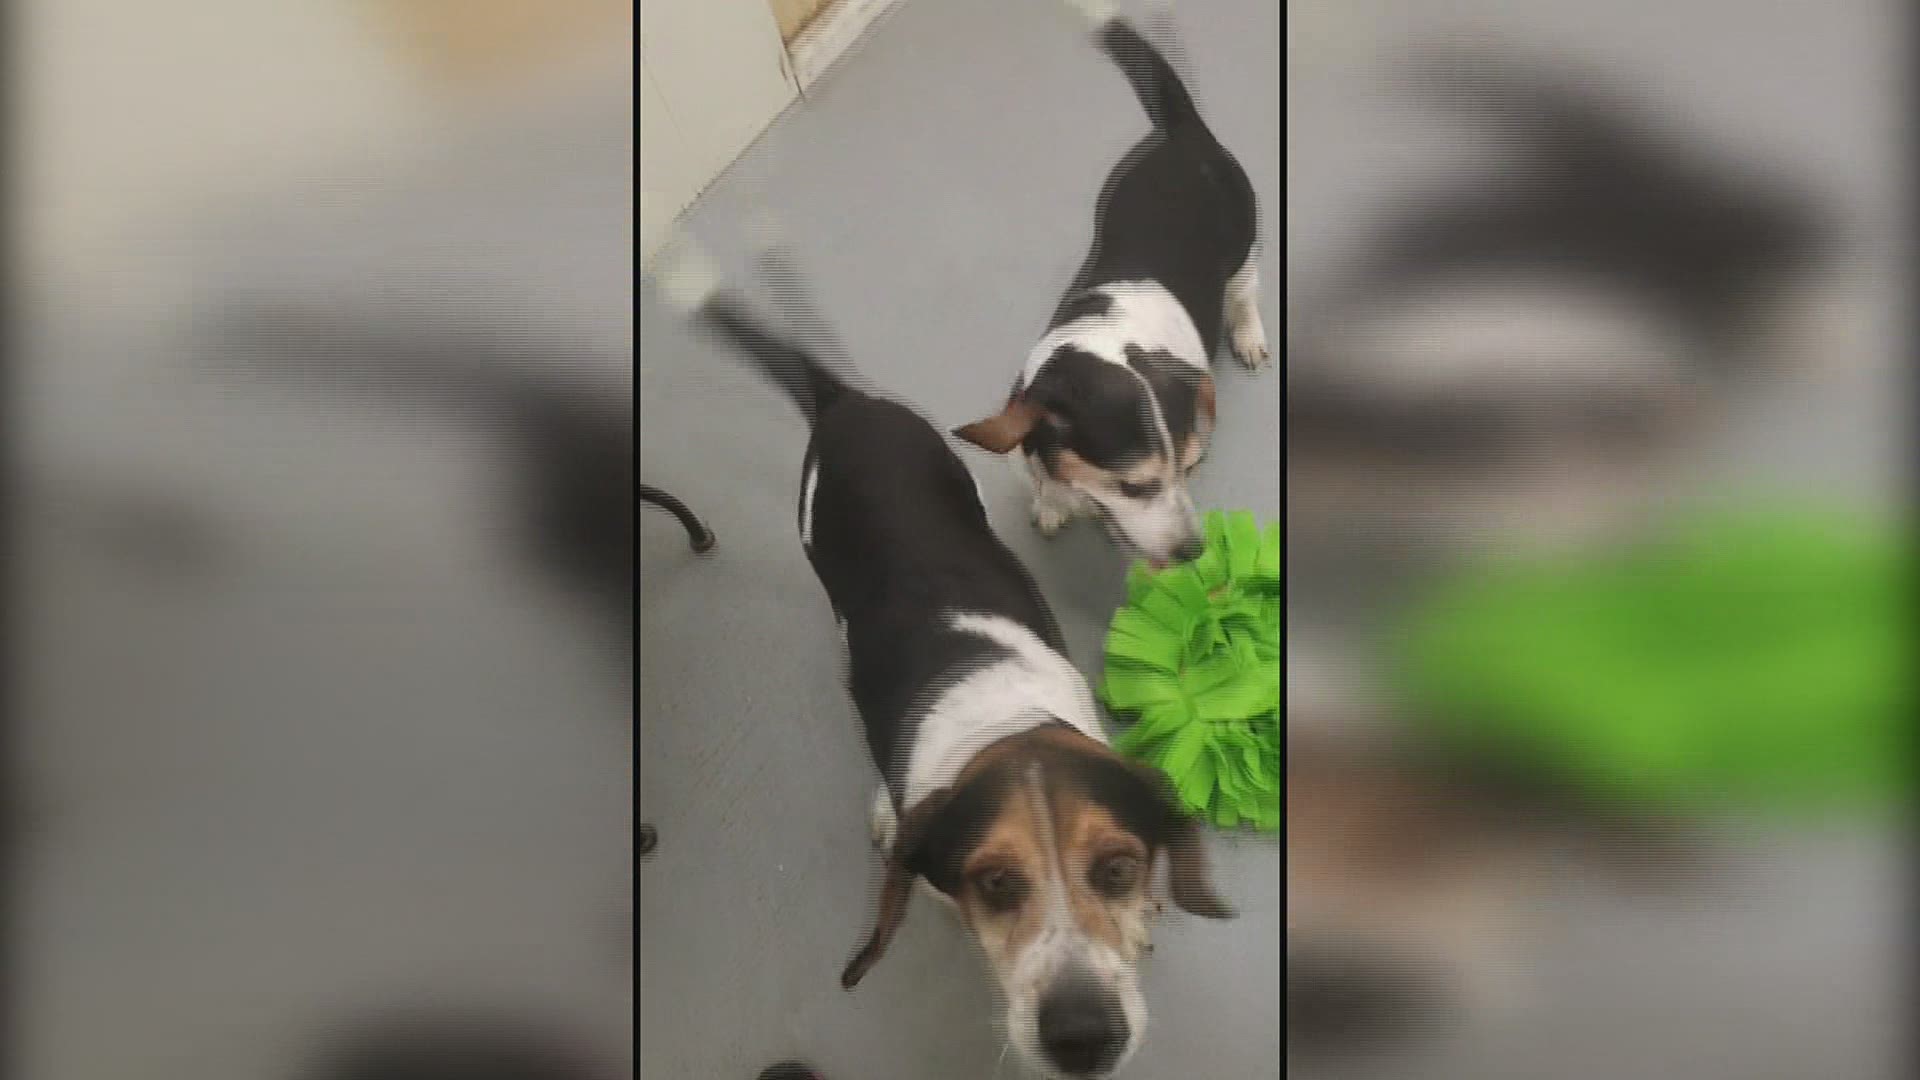 Meet the Quad City Animal Welfare Center's Pets of the Week for Monday, October 19th, 2020: Gram and Gramps the Beagles!